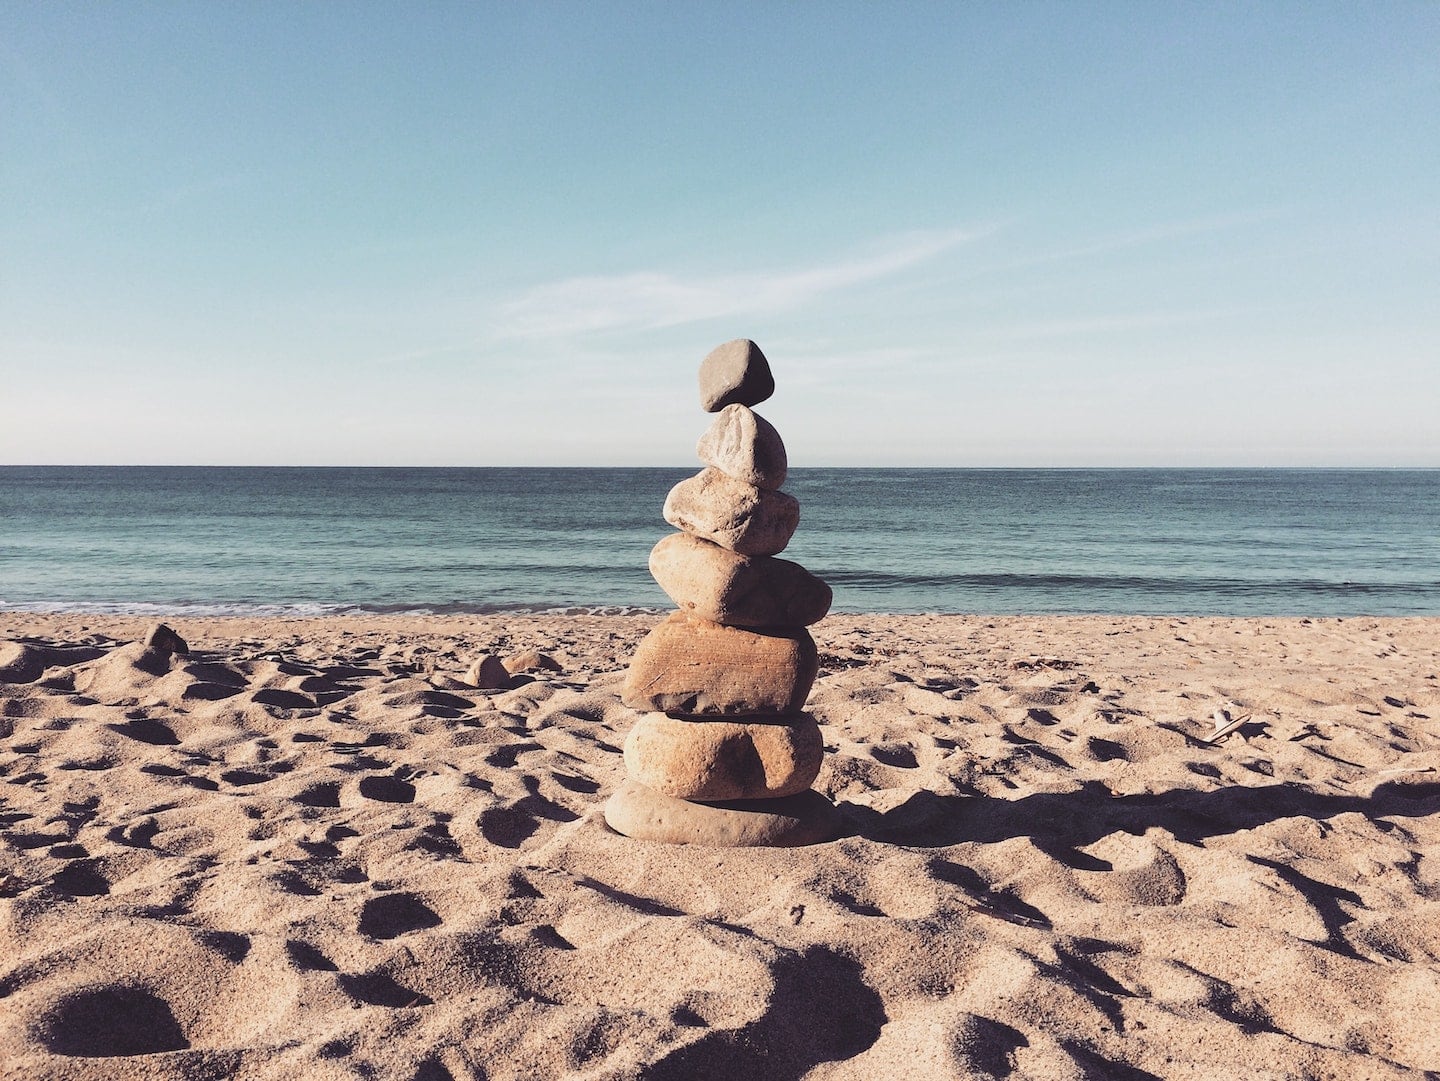 rocks stacked on beach